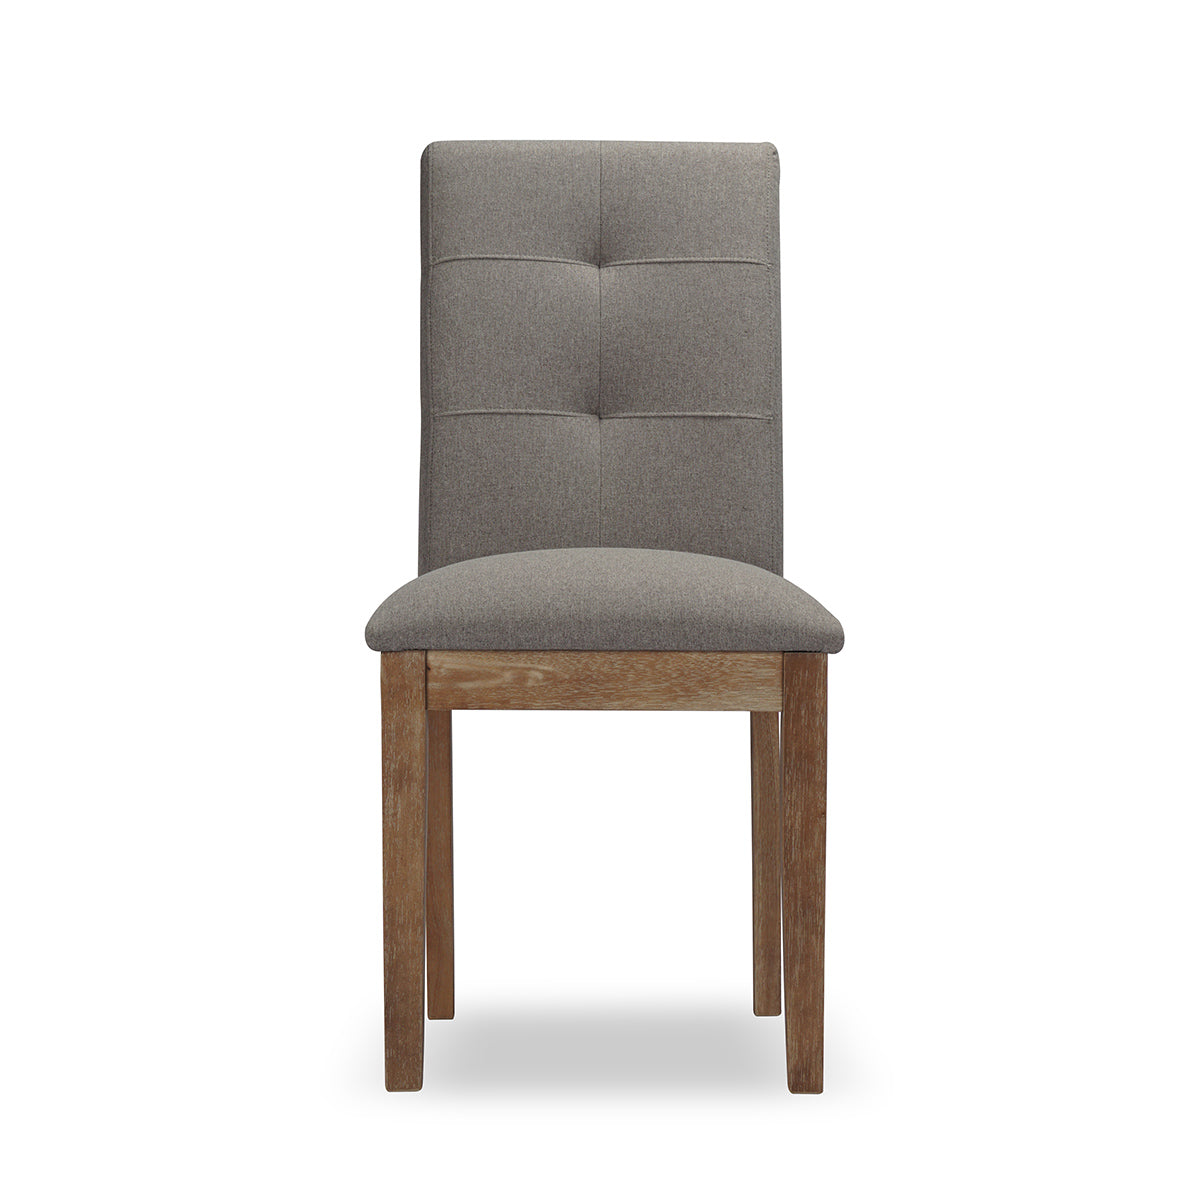 Nathania Solid Wood Dining Chair